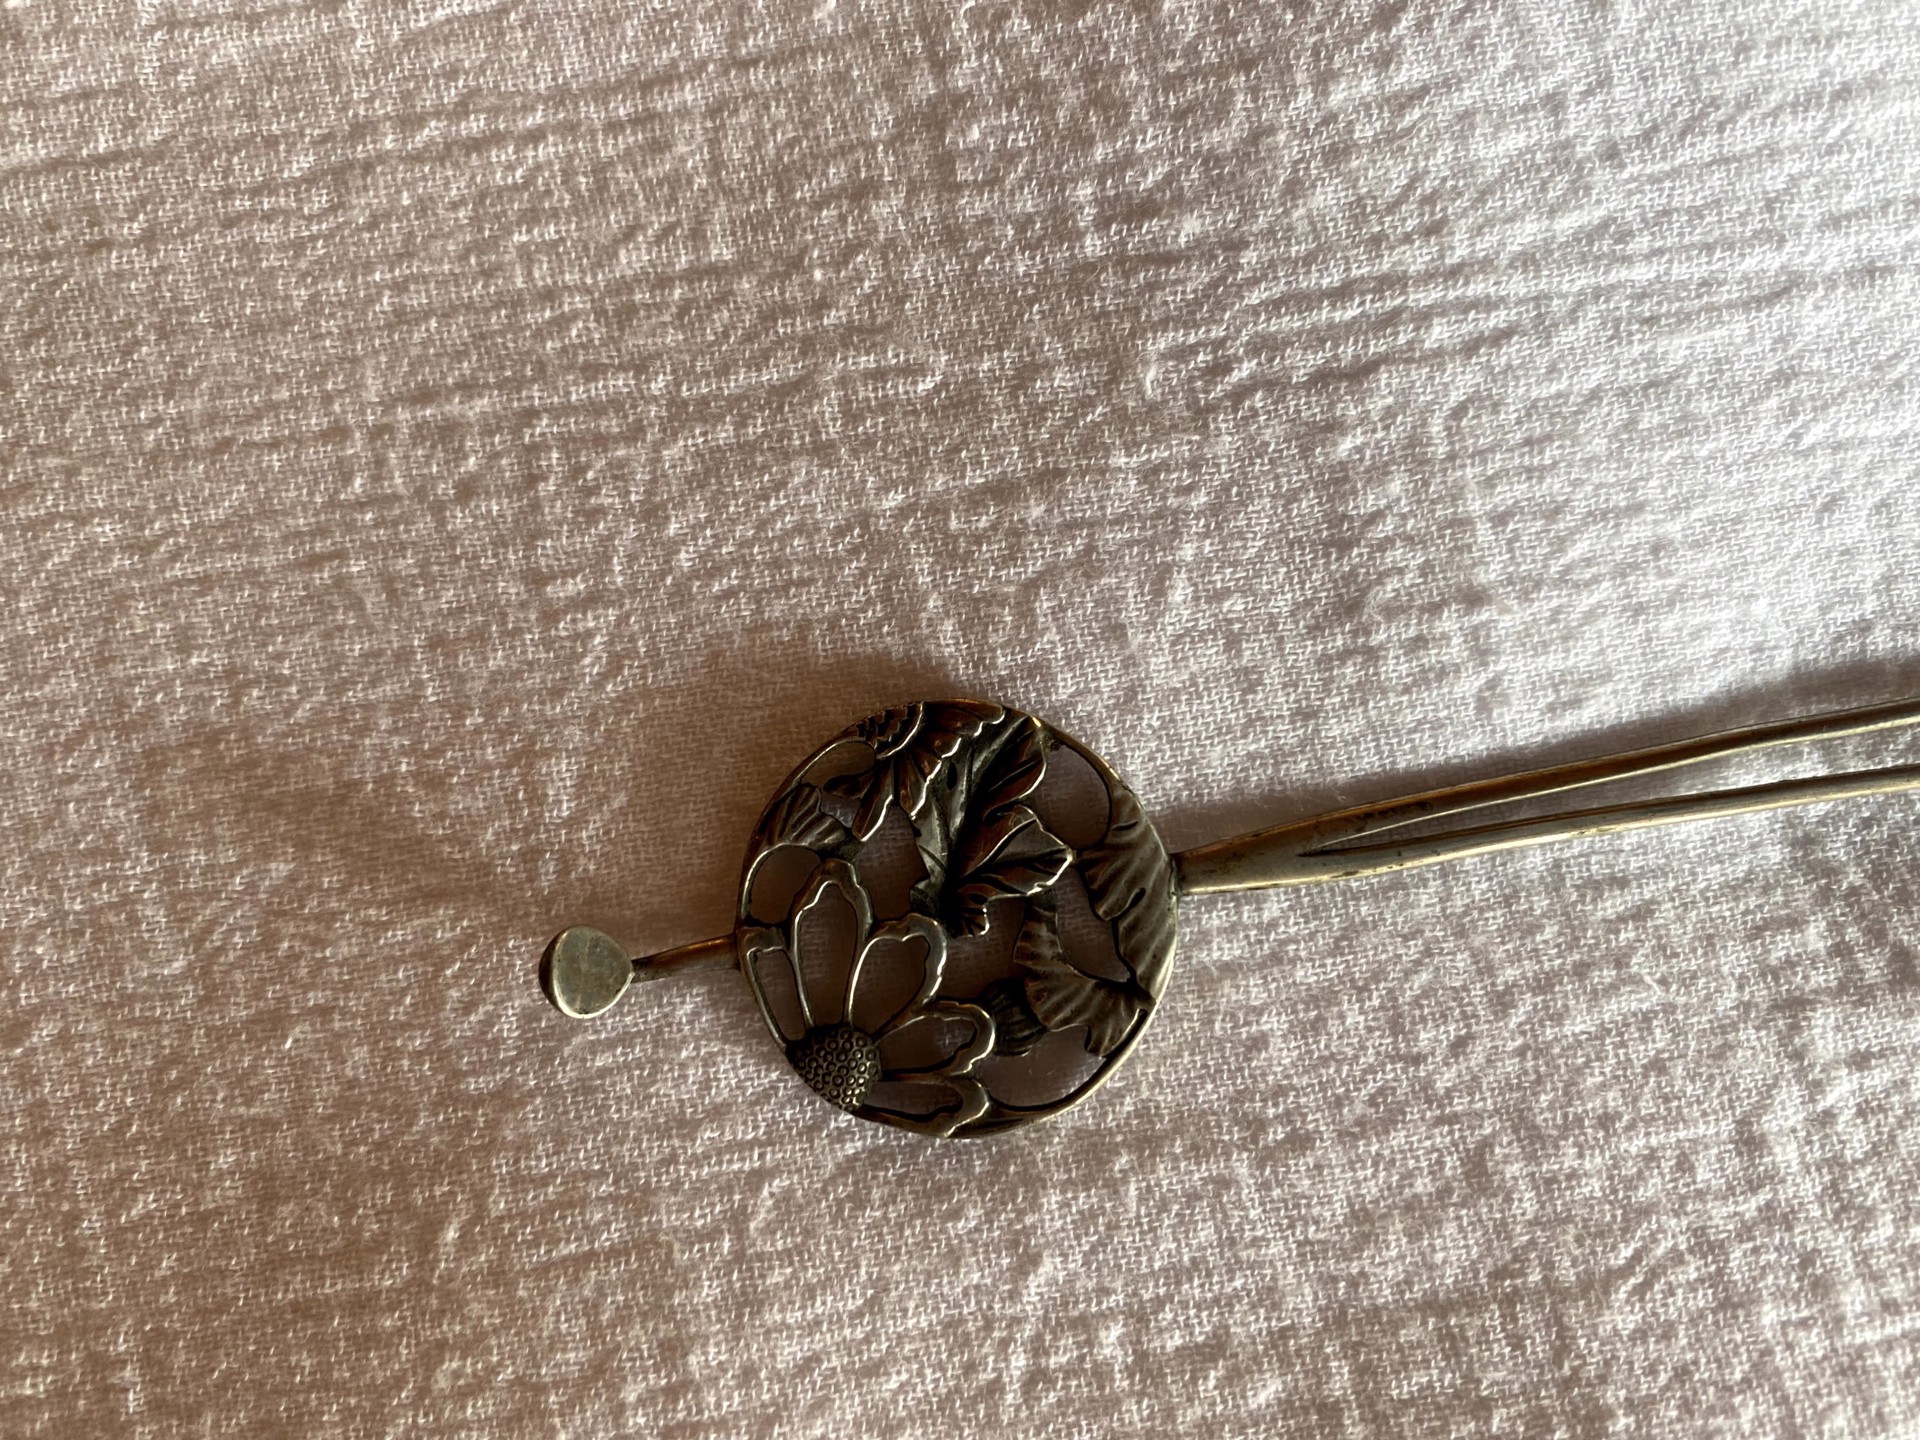 Vintage Hairpin ("Kanzashi" in Japanese) by Kimono Accessories